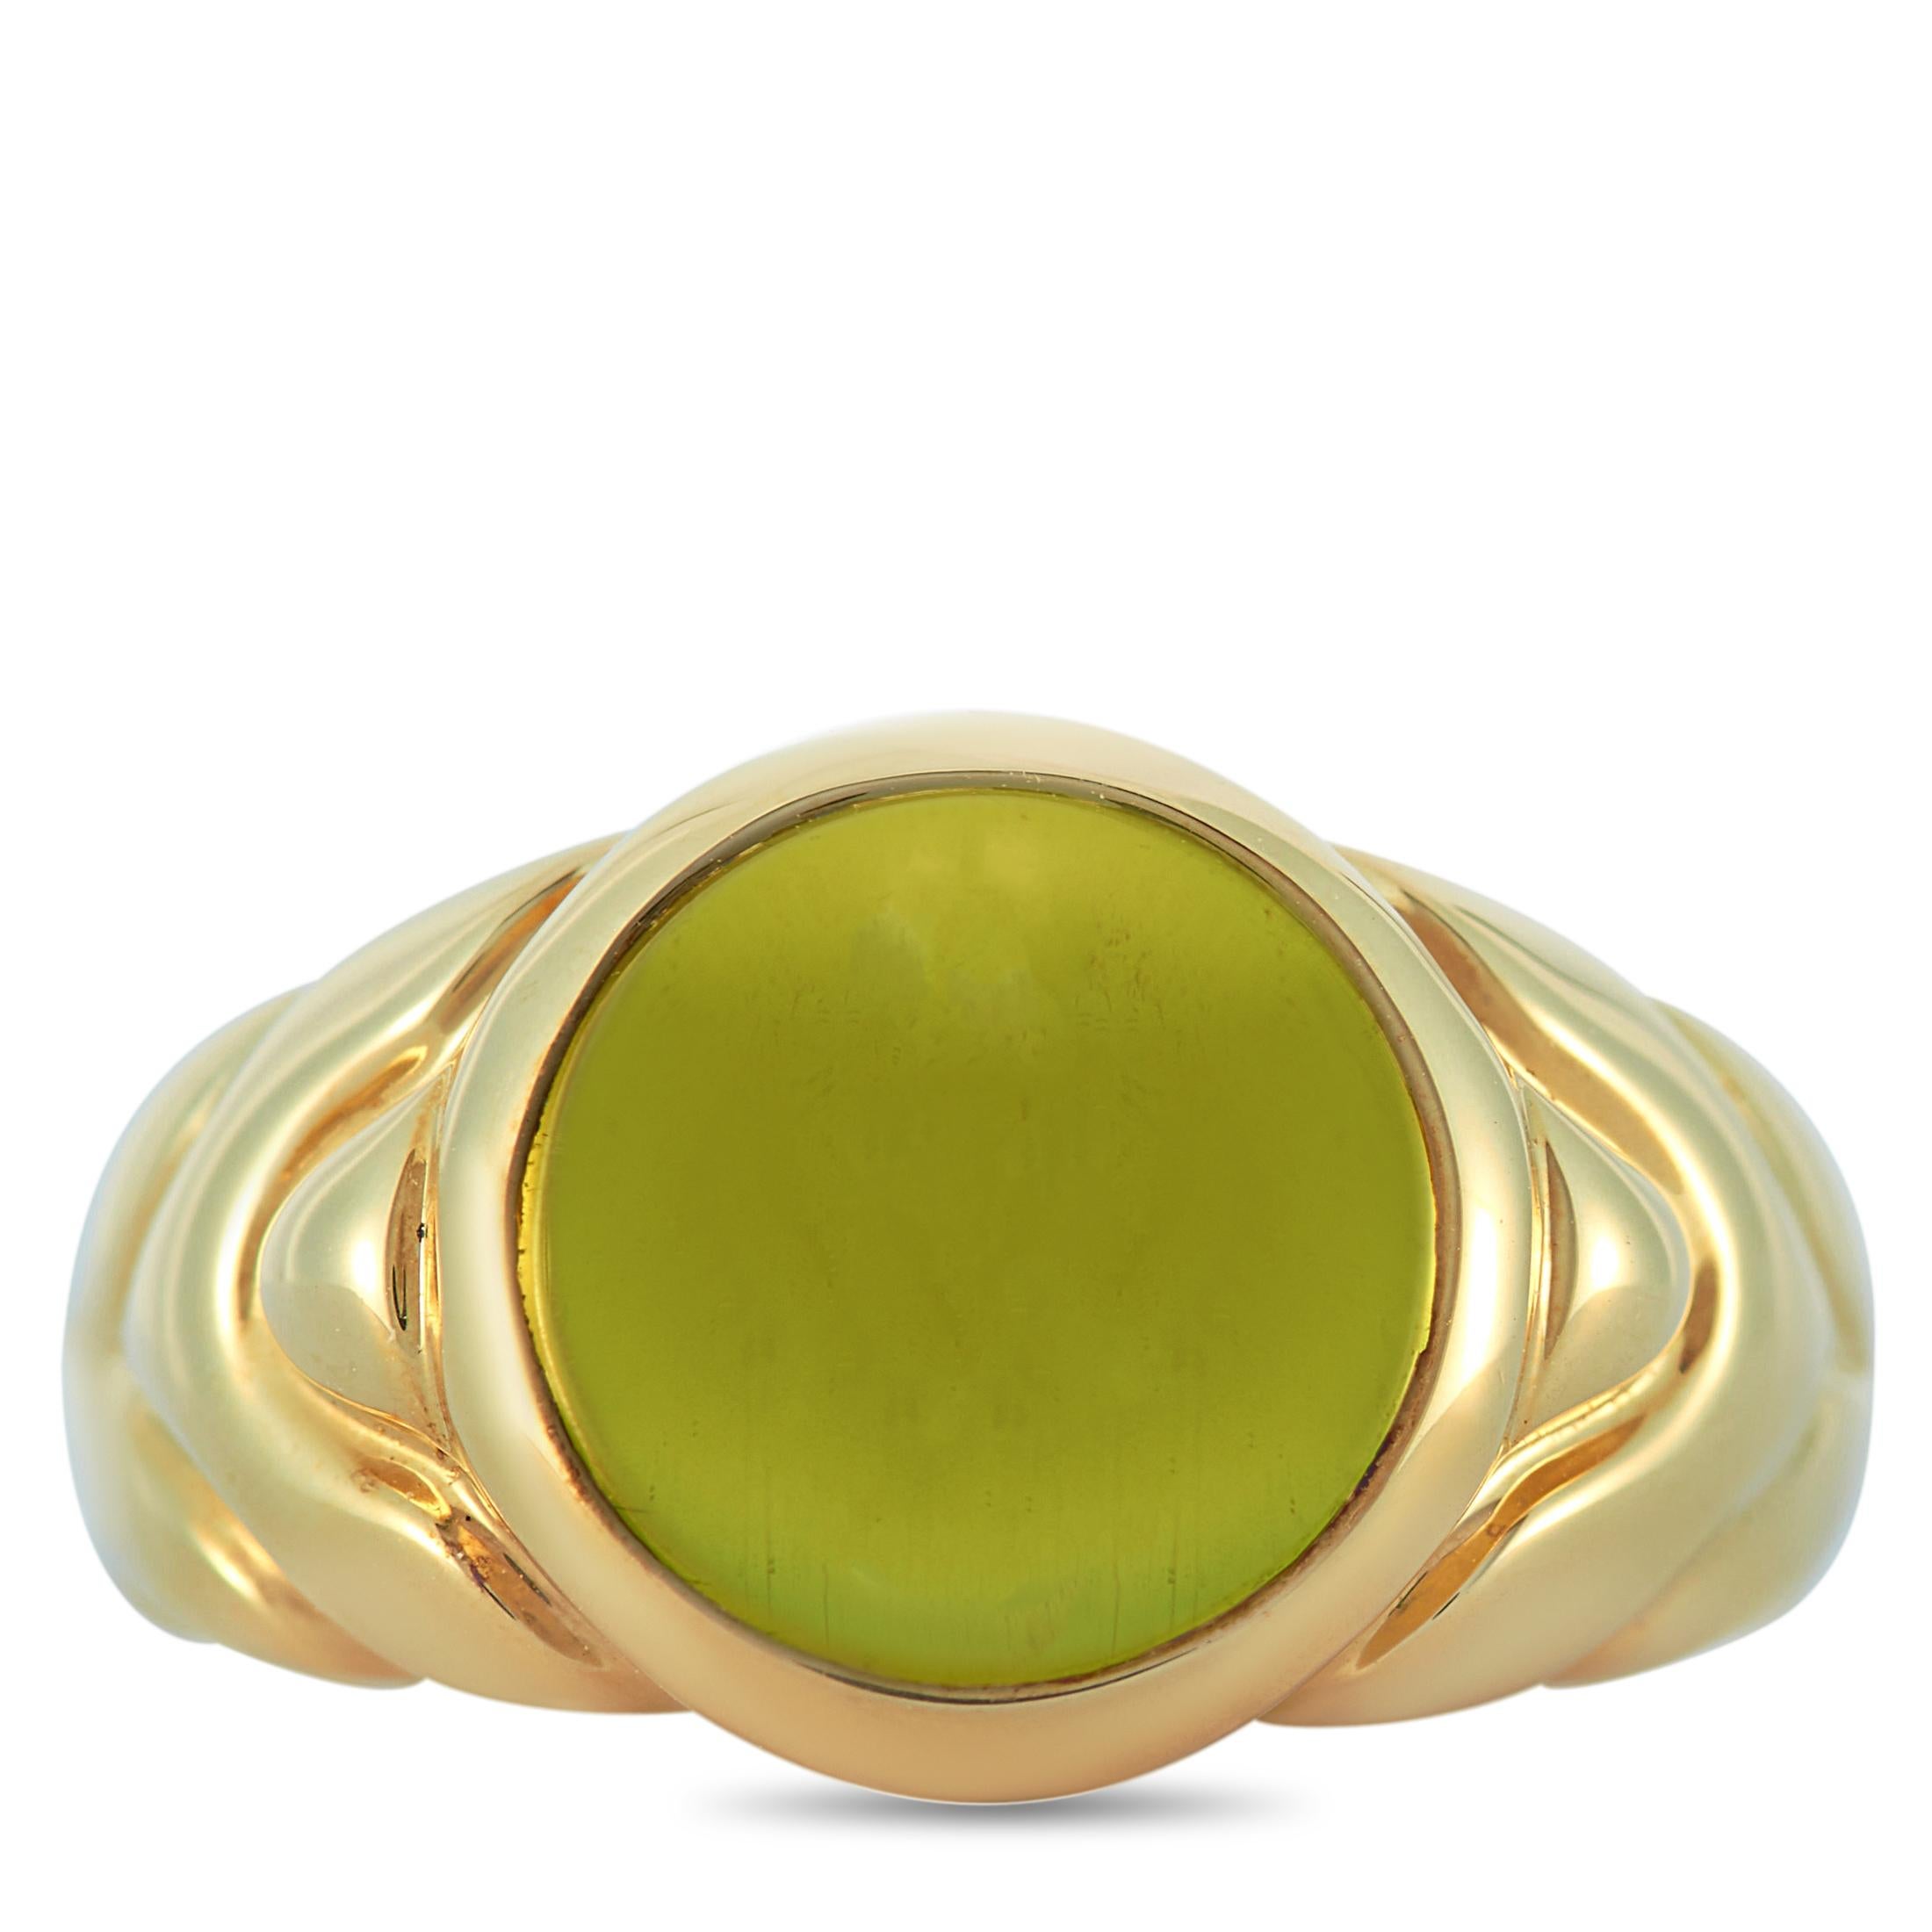 This Bvlgari ring is made of 18K yellow gold and embellished with a peridot. The ring weighs 11.1 grams and boasts band thickness of 3 mm and top height of 8 mm, while top dimensions measure 10 by 10 mm.
 
 Offered in estate condition, this item